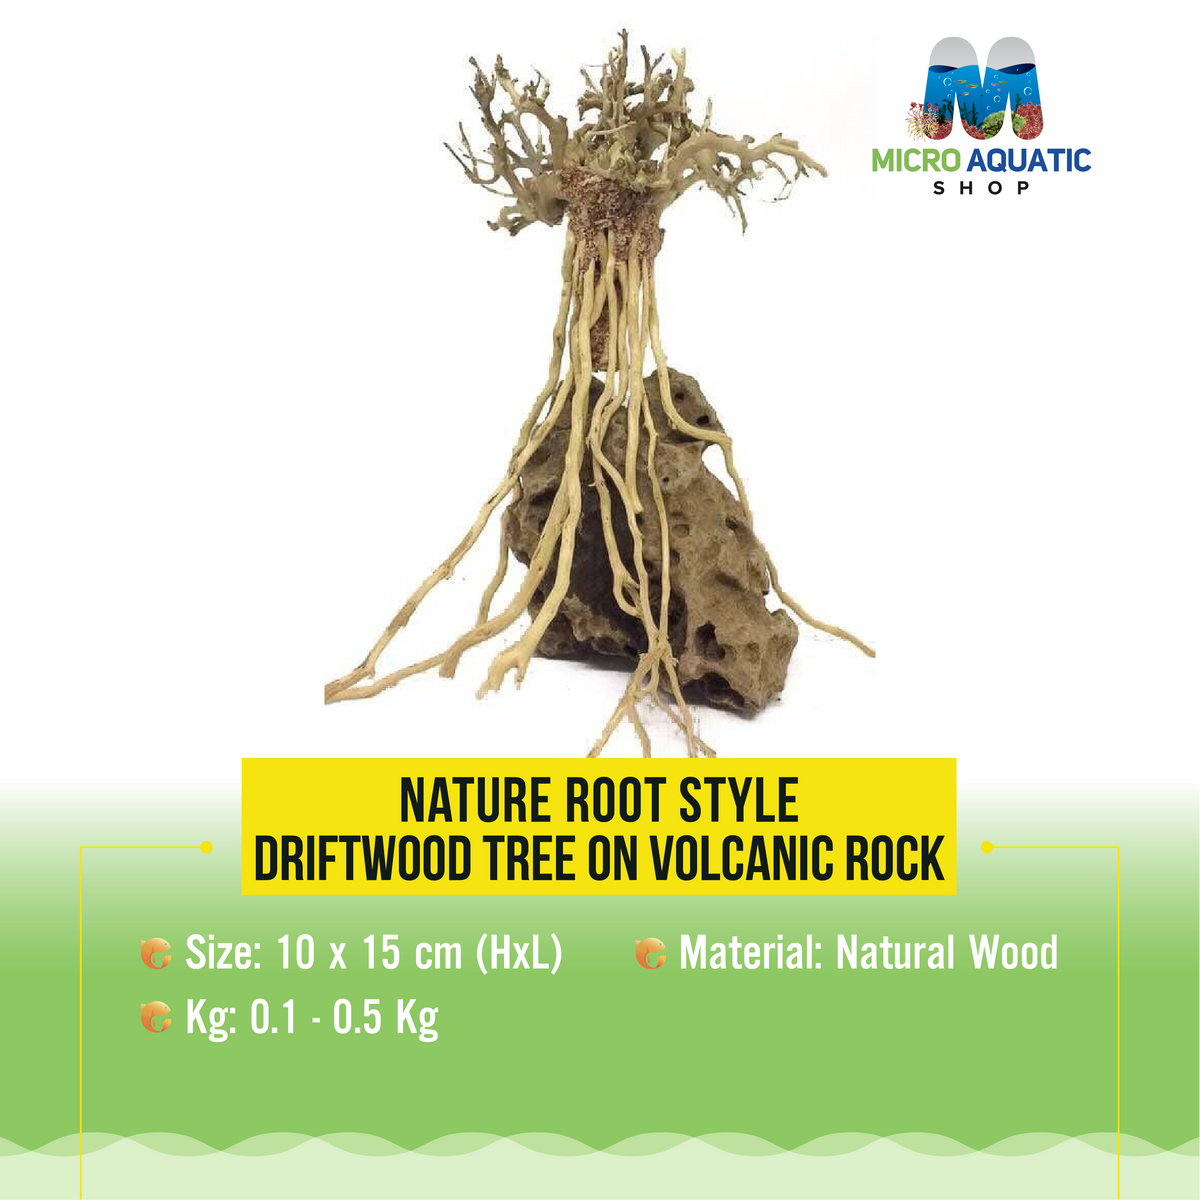 Nature Root Style Driftwood tree on Volcanic Rock